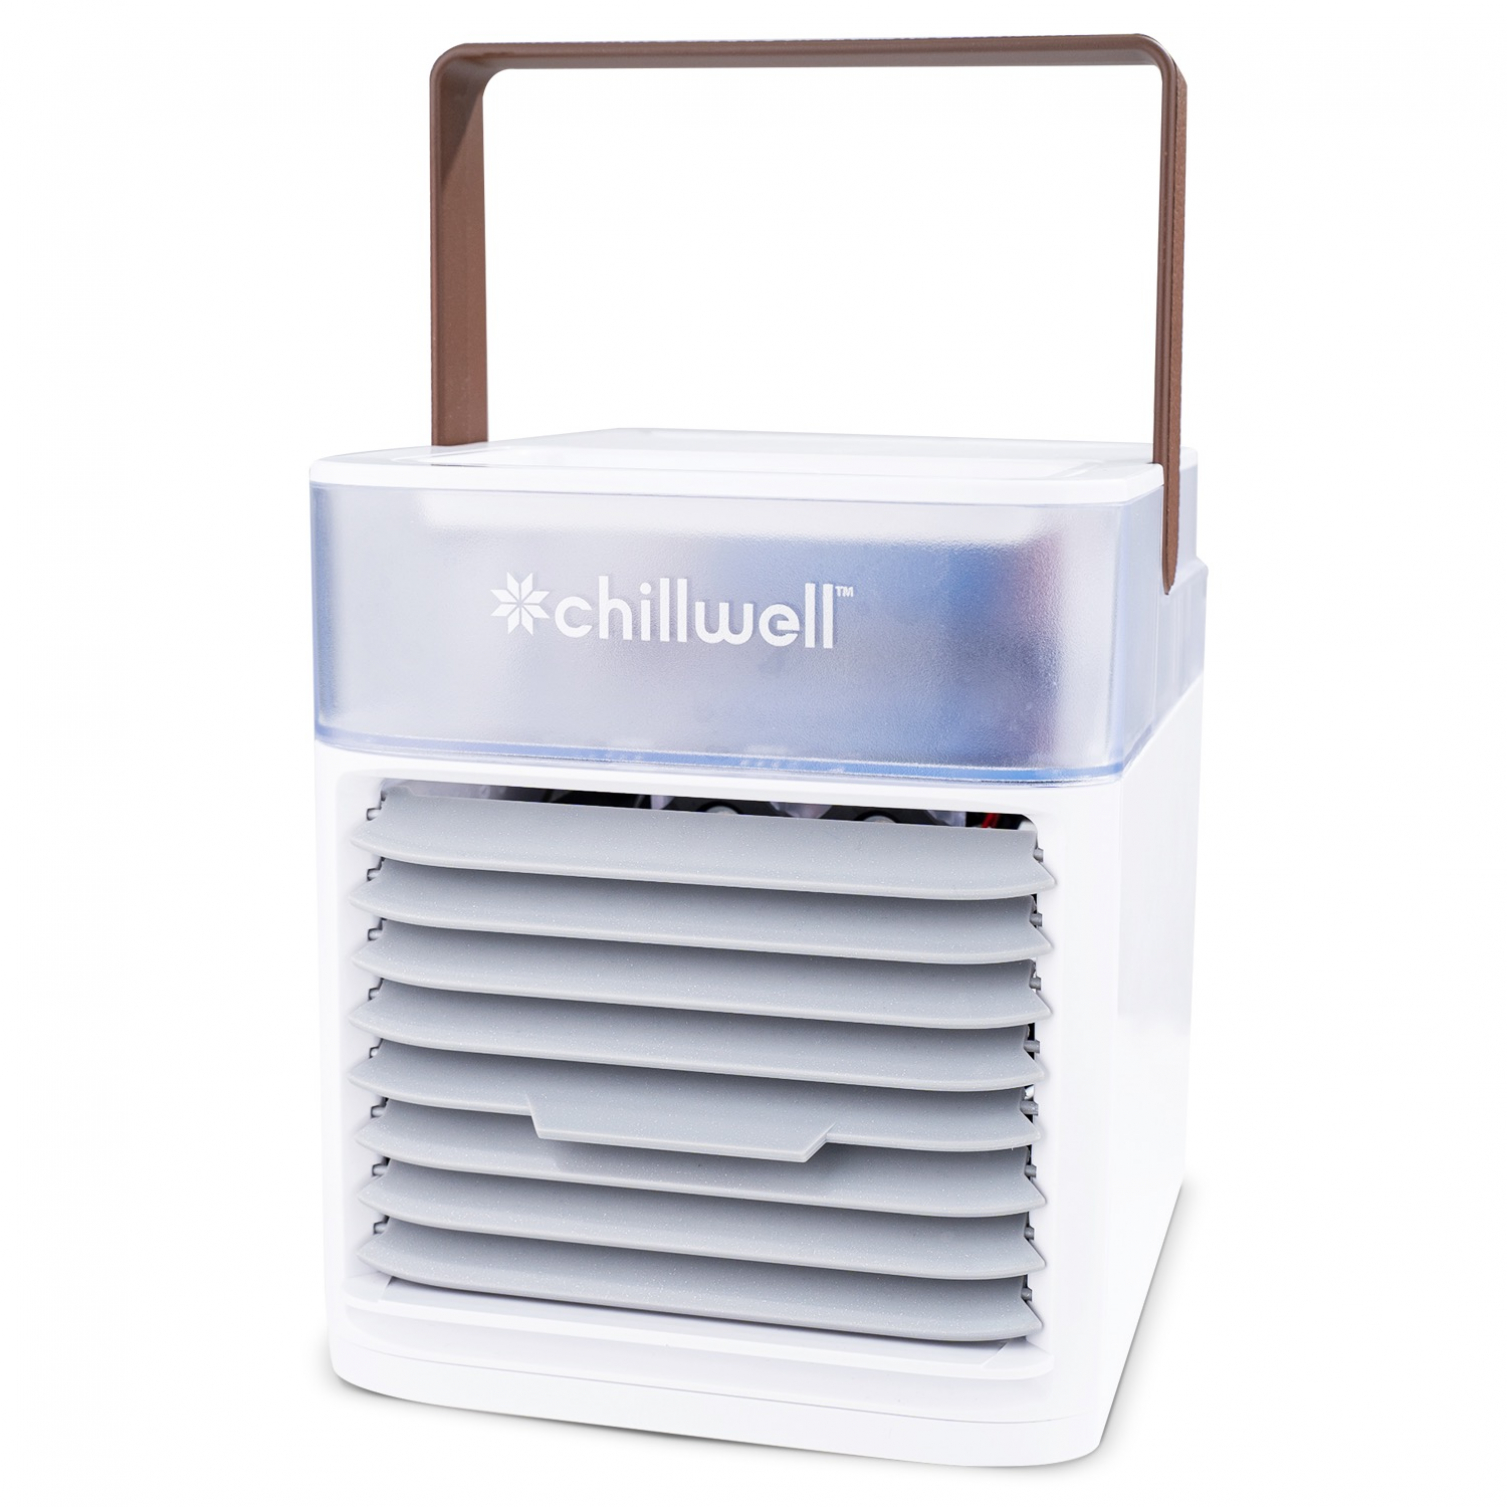 Chillwell Ac Chill Box For Sale